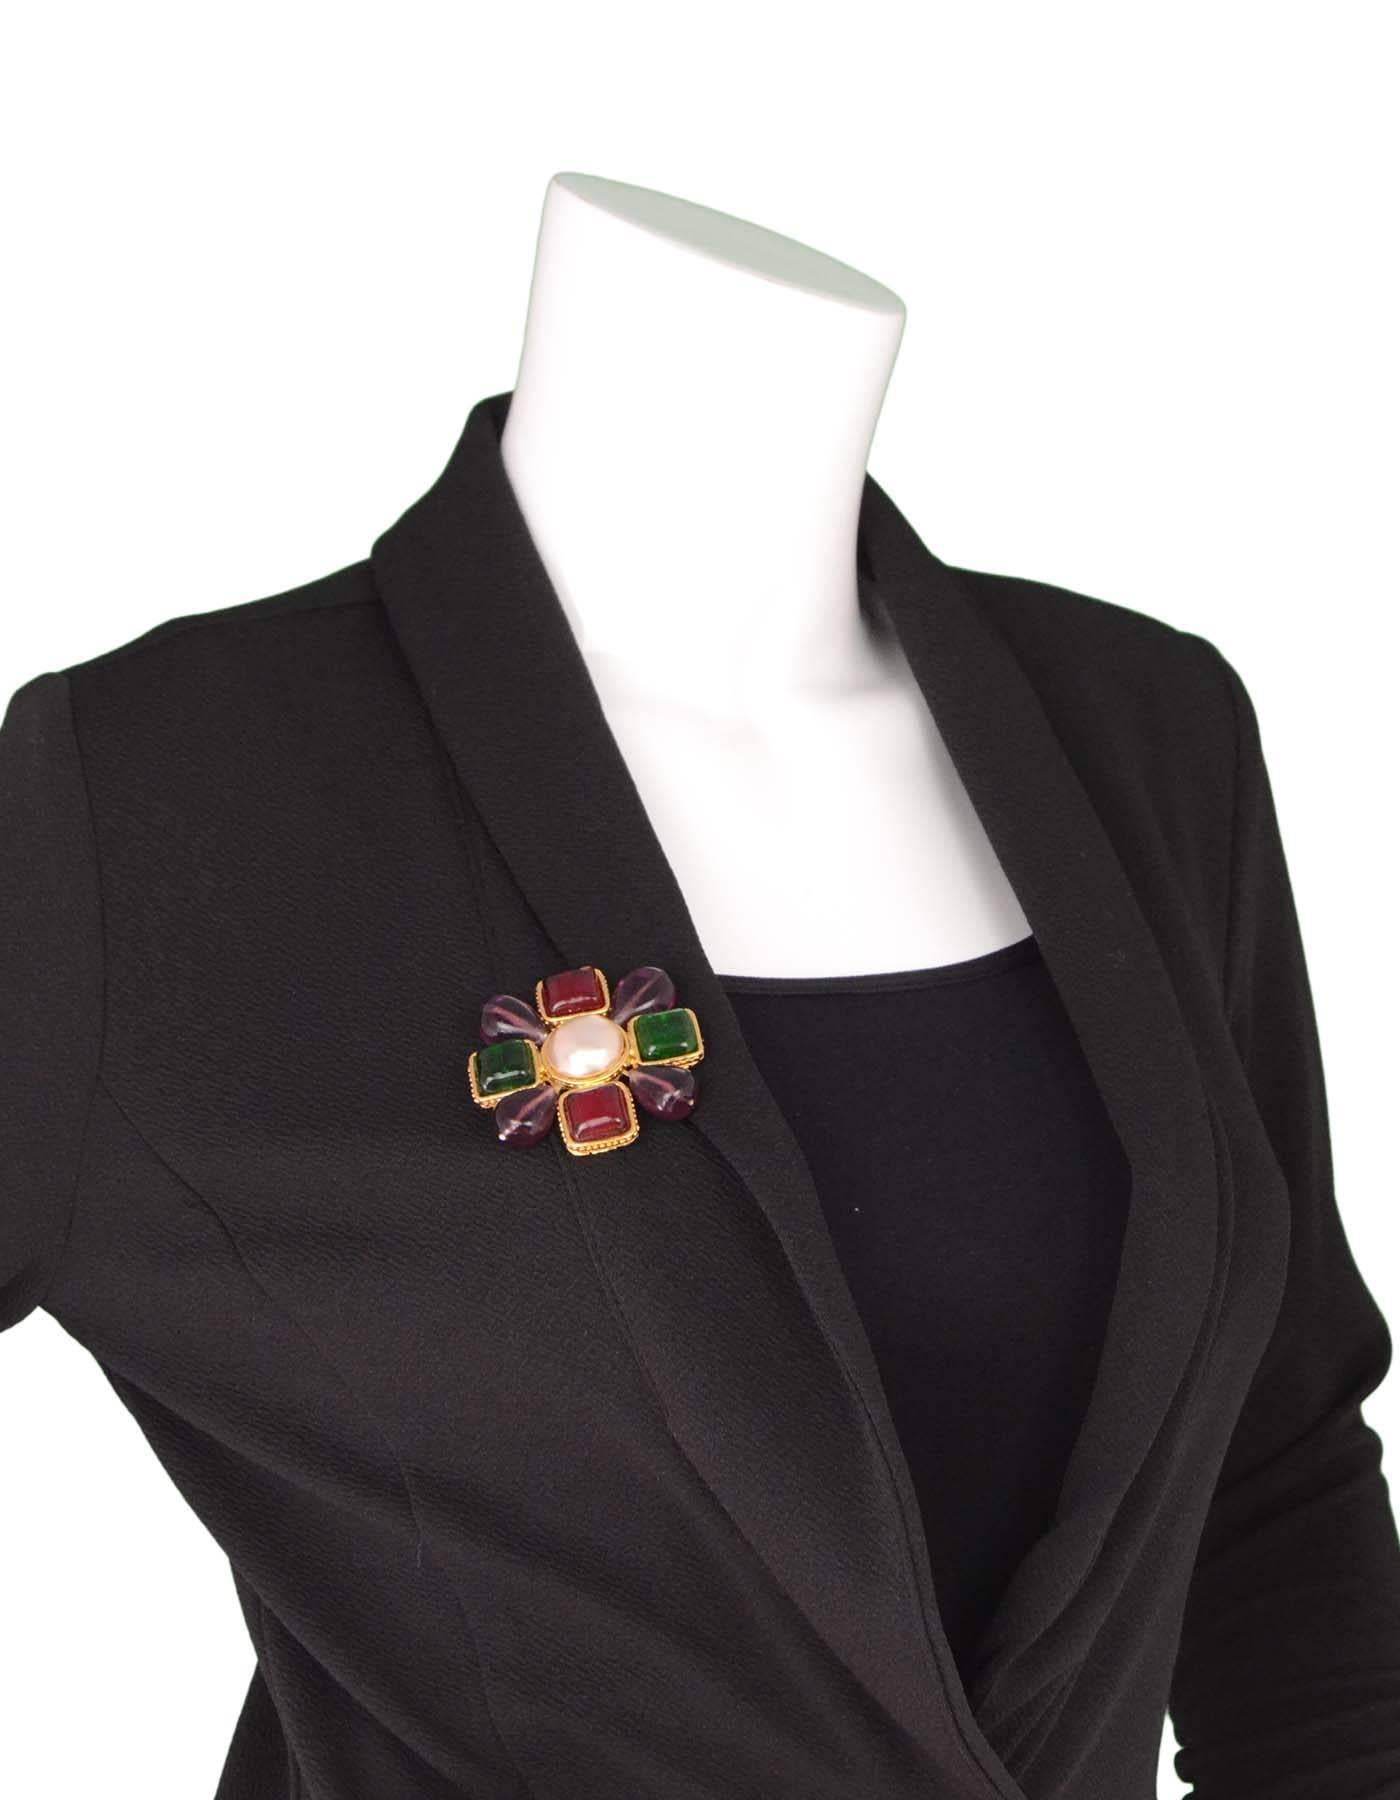 Chanel Multicolored Gripoix Brooch

Made In: France
Year Of Production: 1987
Color: Multicolored
Materials: Metal, gripoix, and faux jewels
Closure: Pin back closure
Stamp: Chanel 2 CC 5 Made in France
Overall Condition: Excellent pre-owned